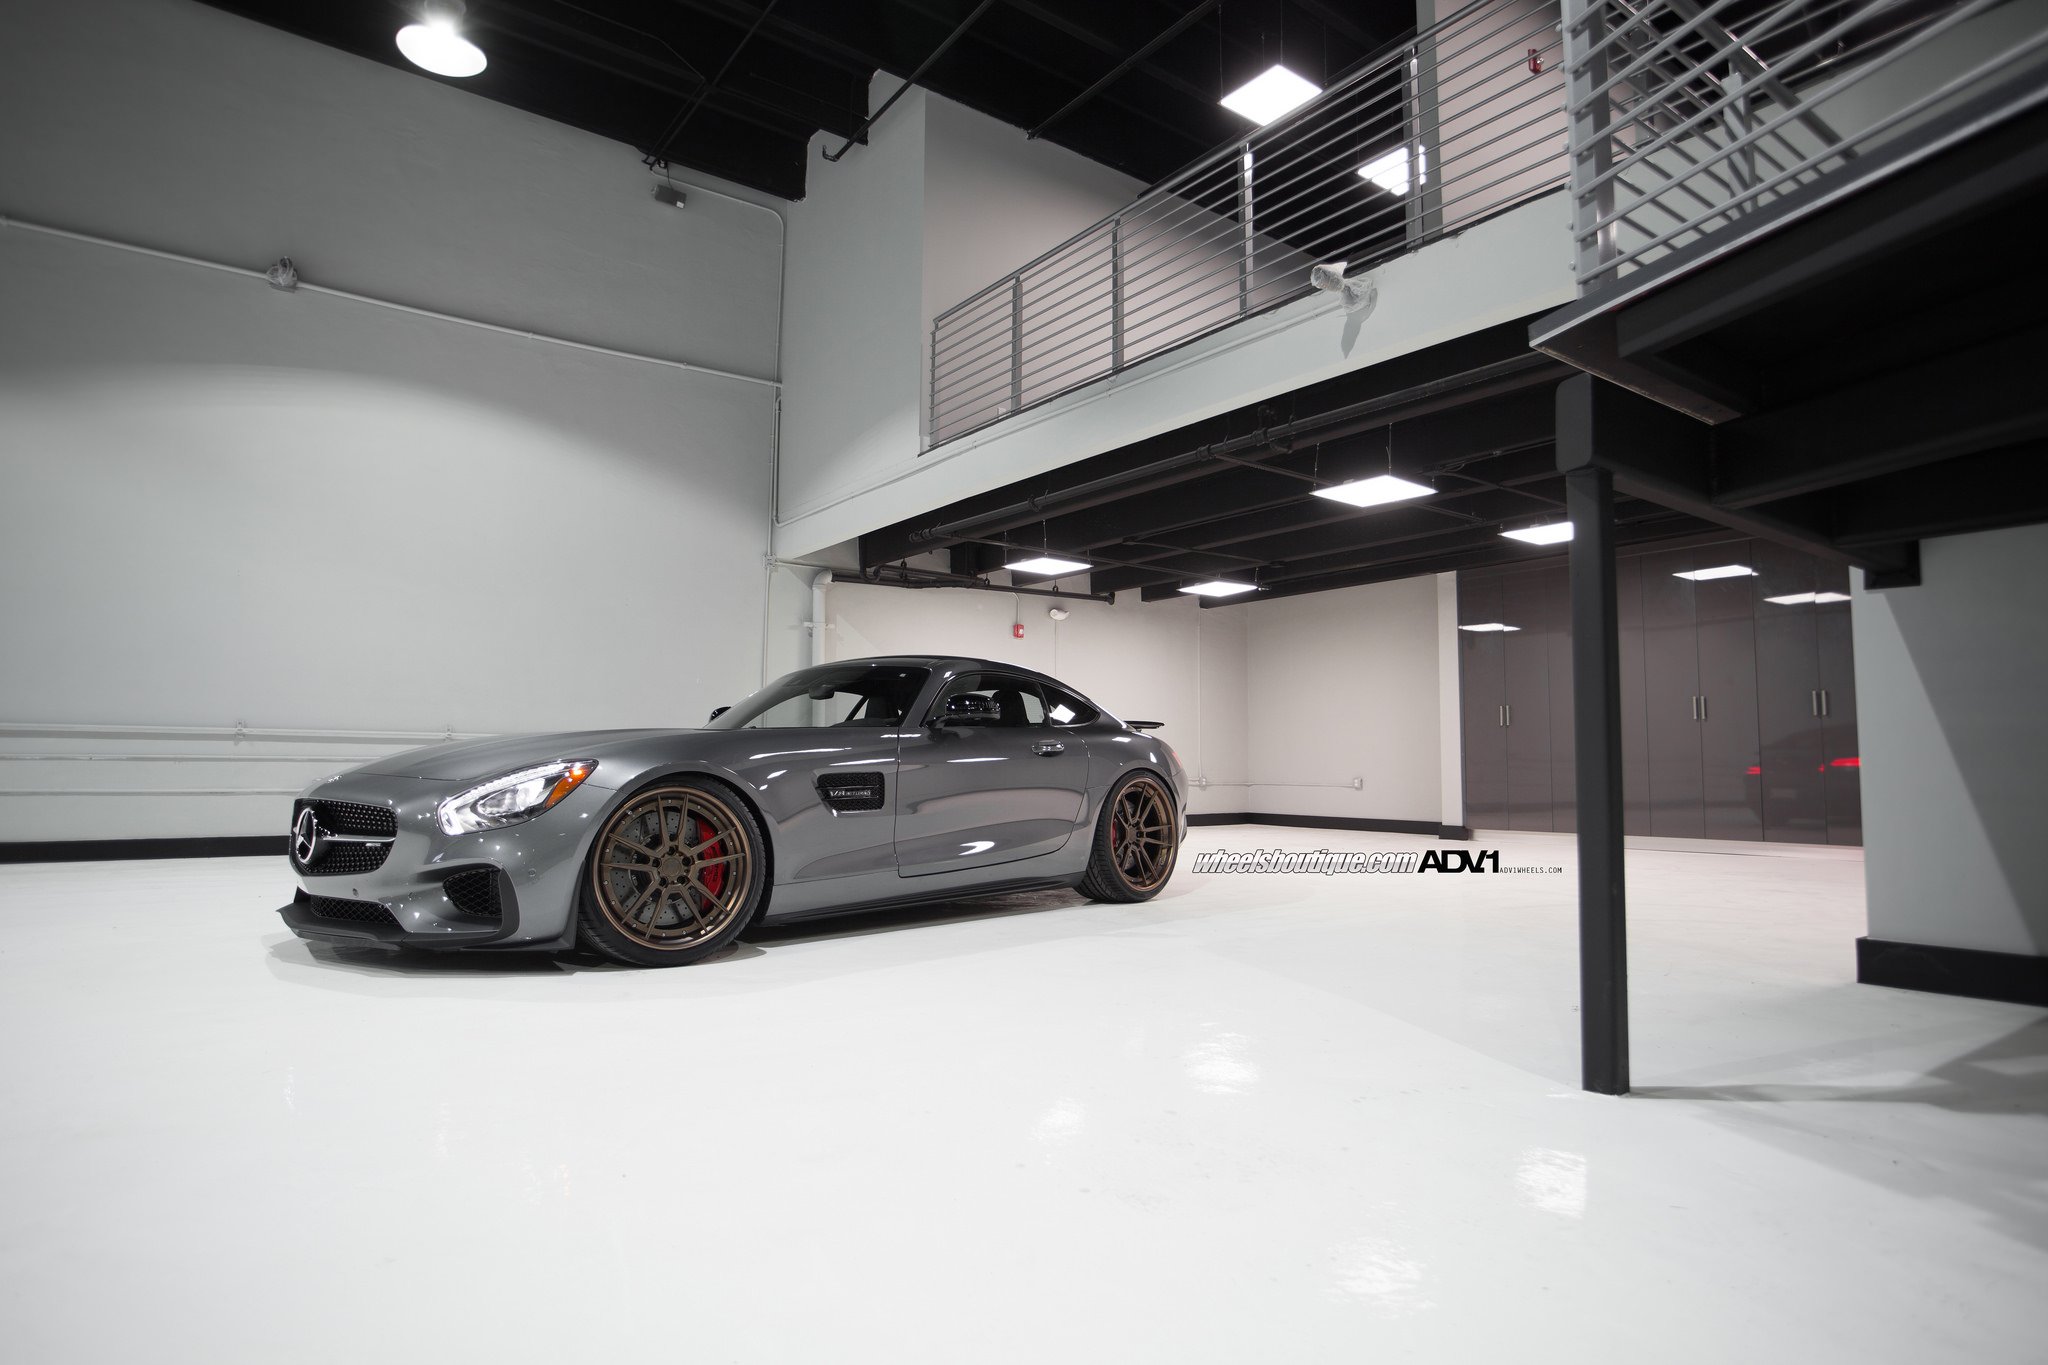 adv, 1, Wheels, Gallery, Mercedes, Amg, Gts, Edition, One, Coupe, Supercars, Cars Wallpaper